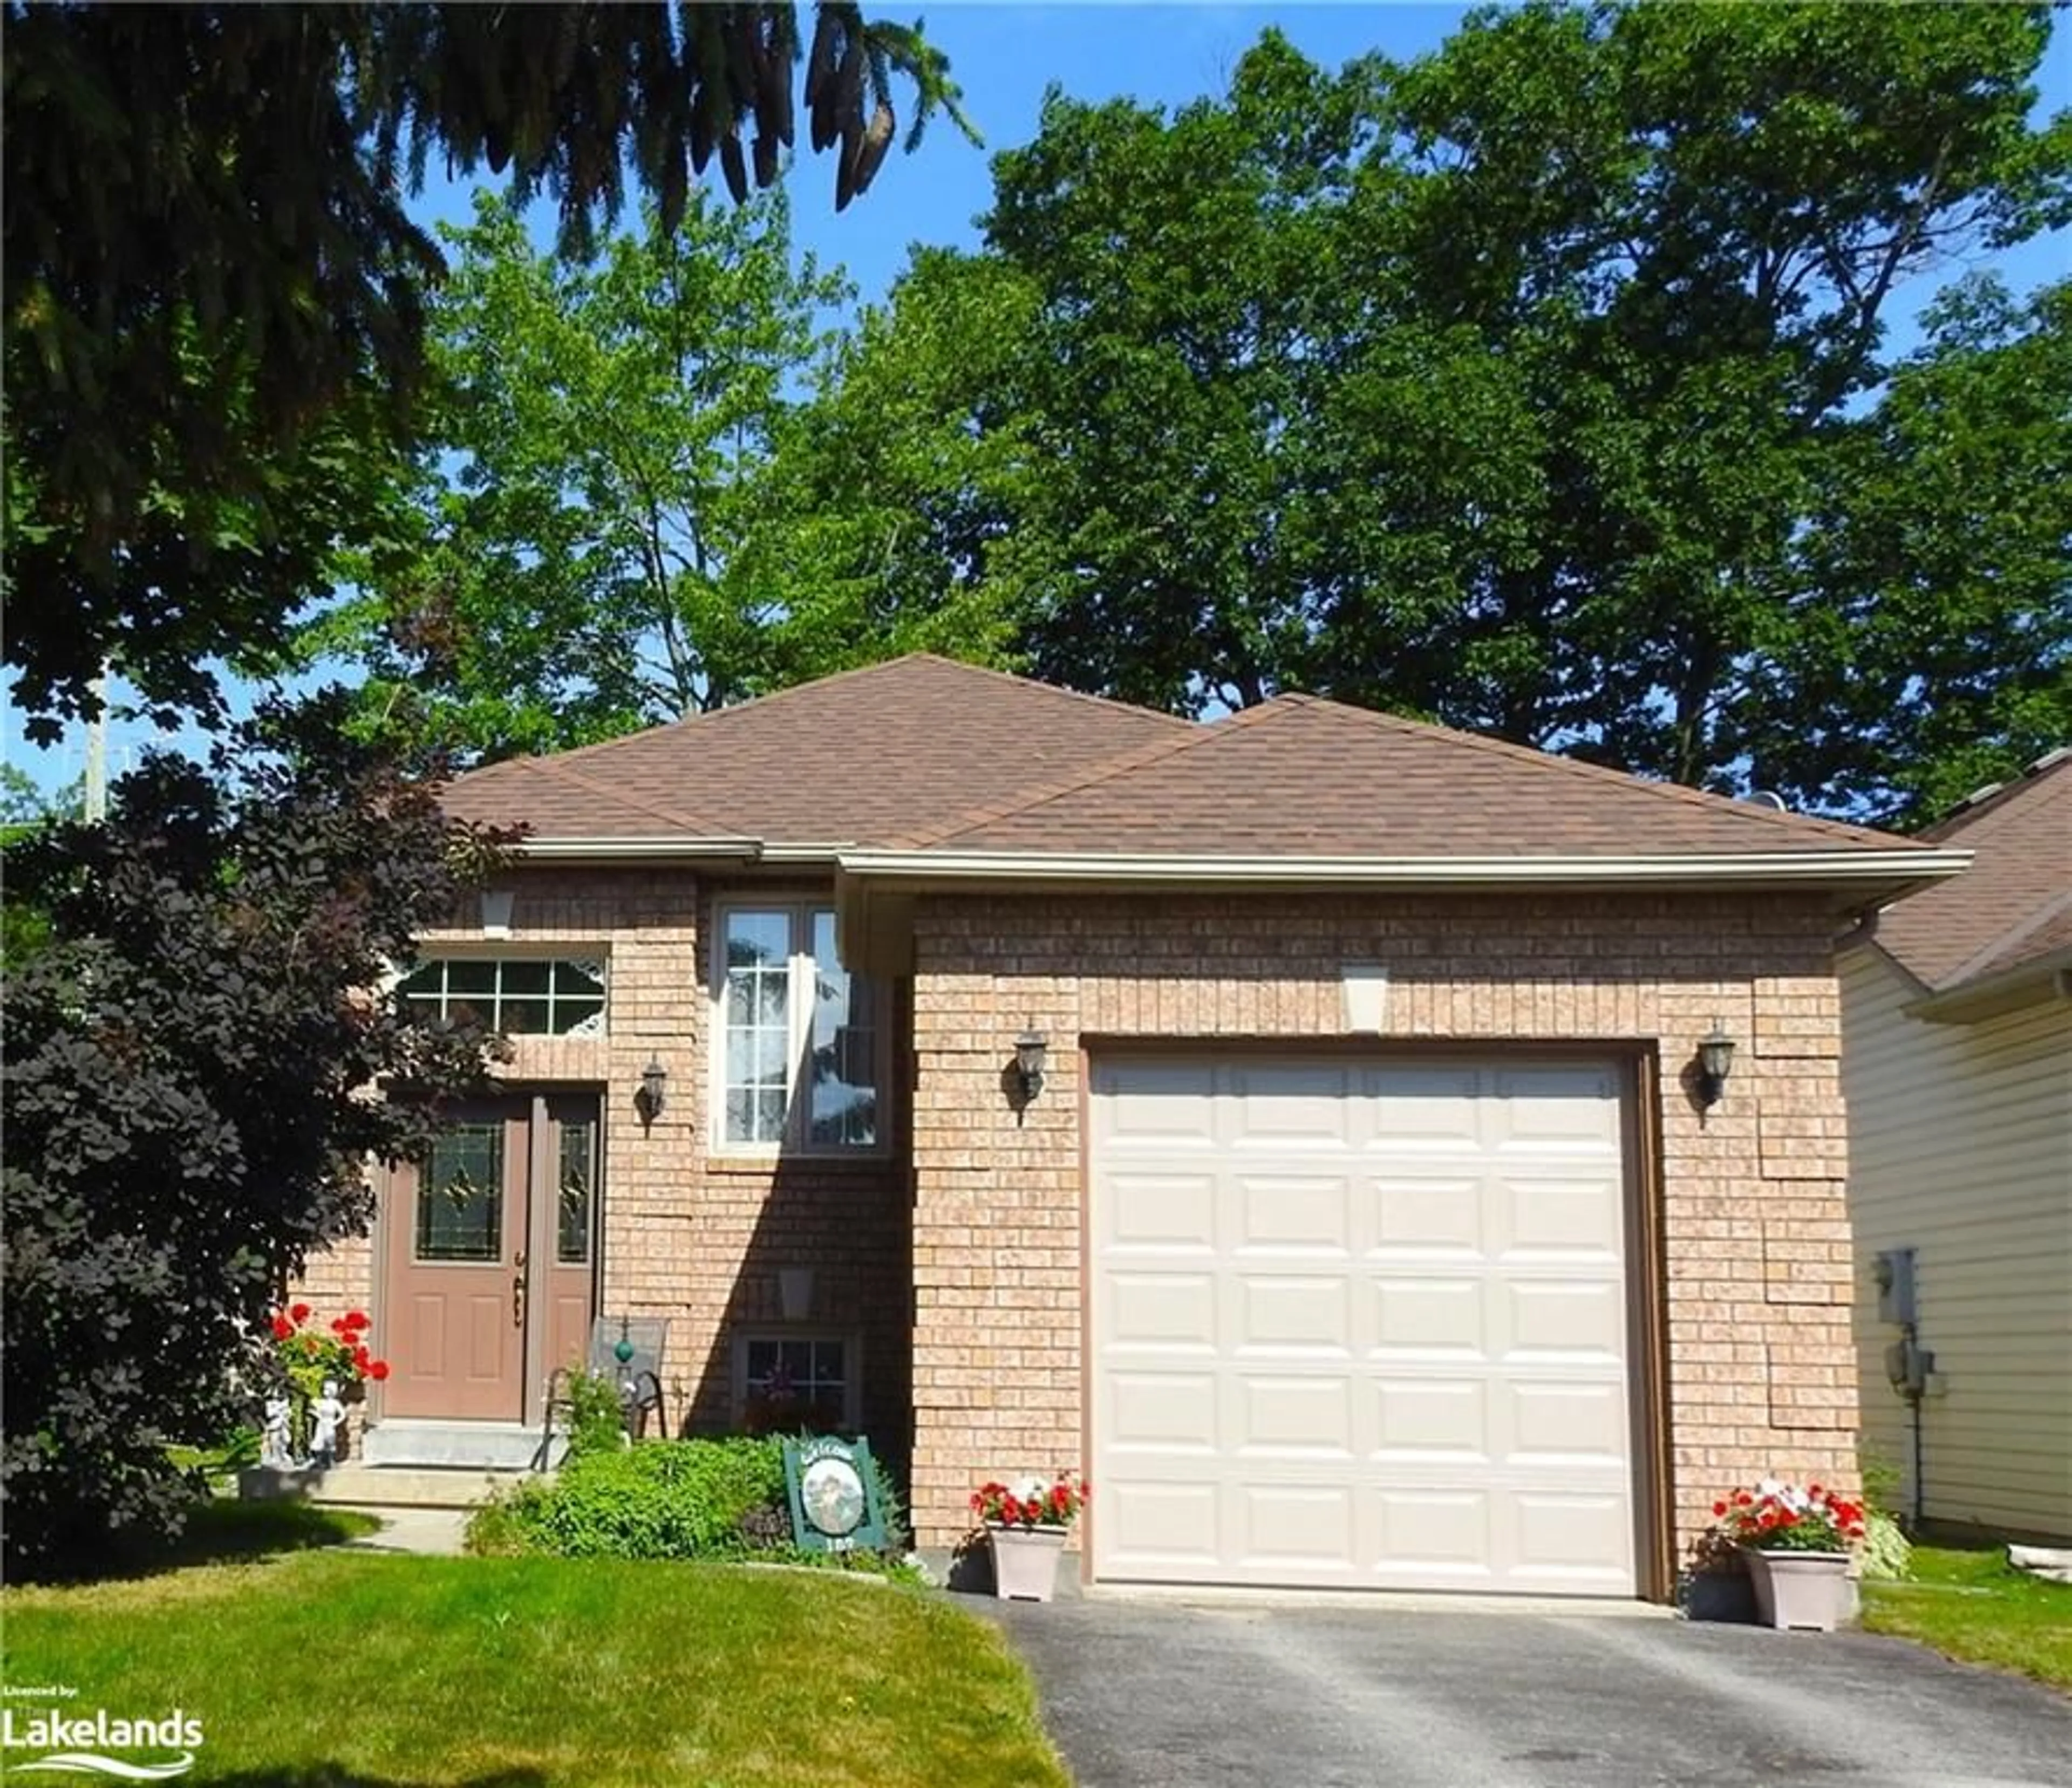 Home with brick exterior material for 189 Dyer Dr, Wasaga Beach Ontario L9Z 1L9